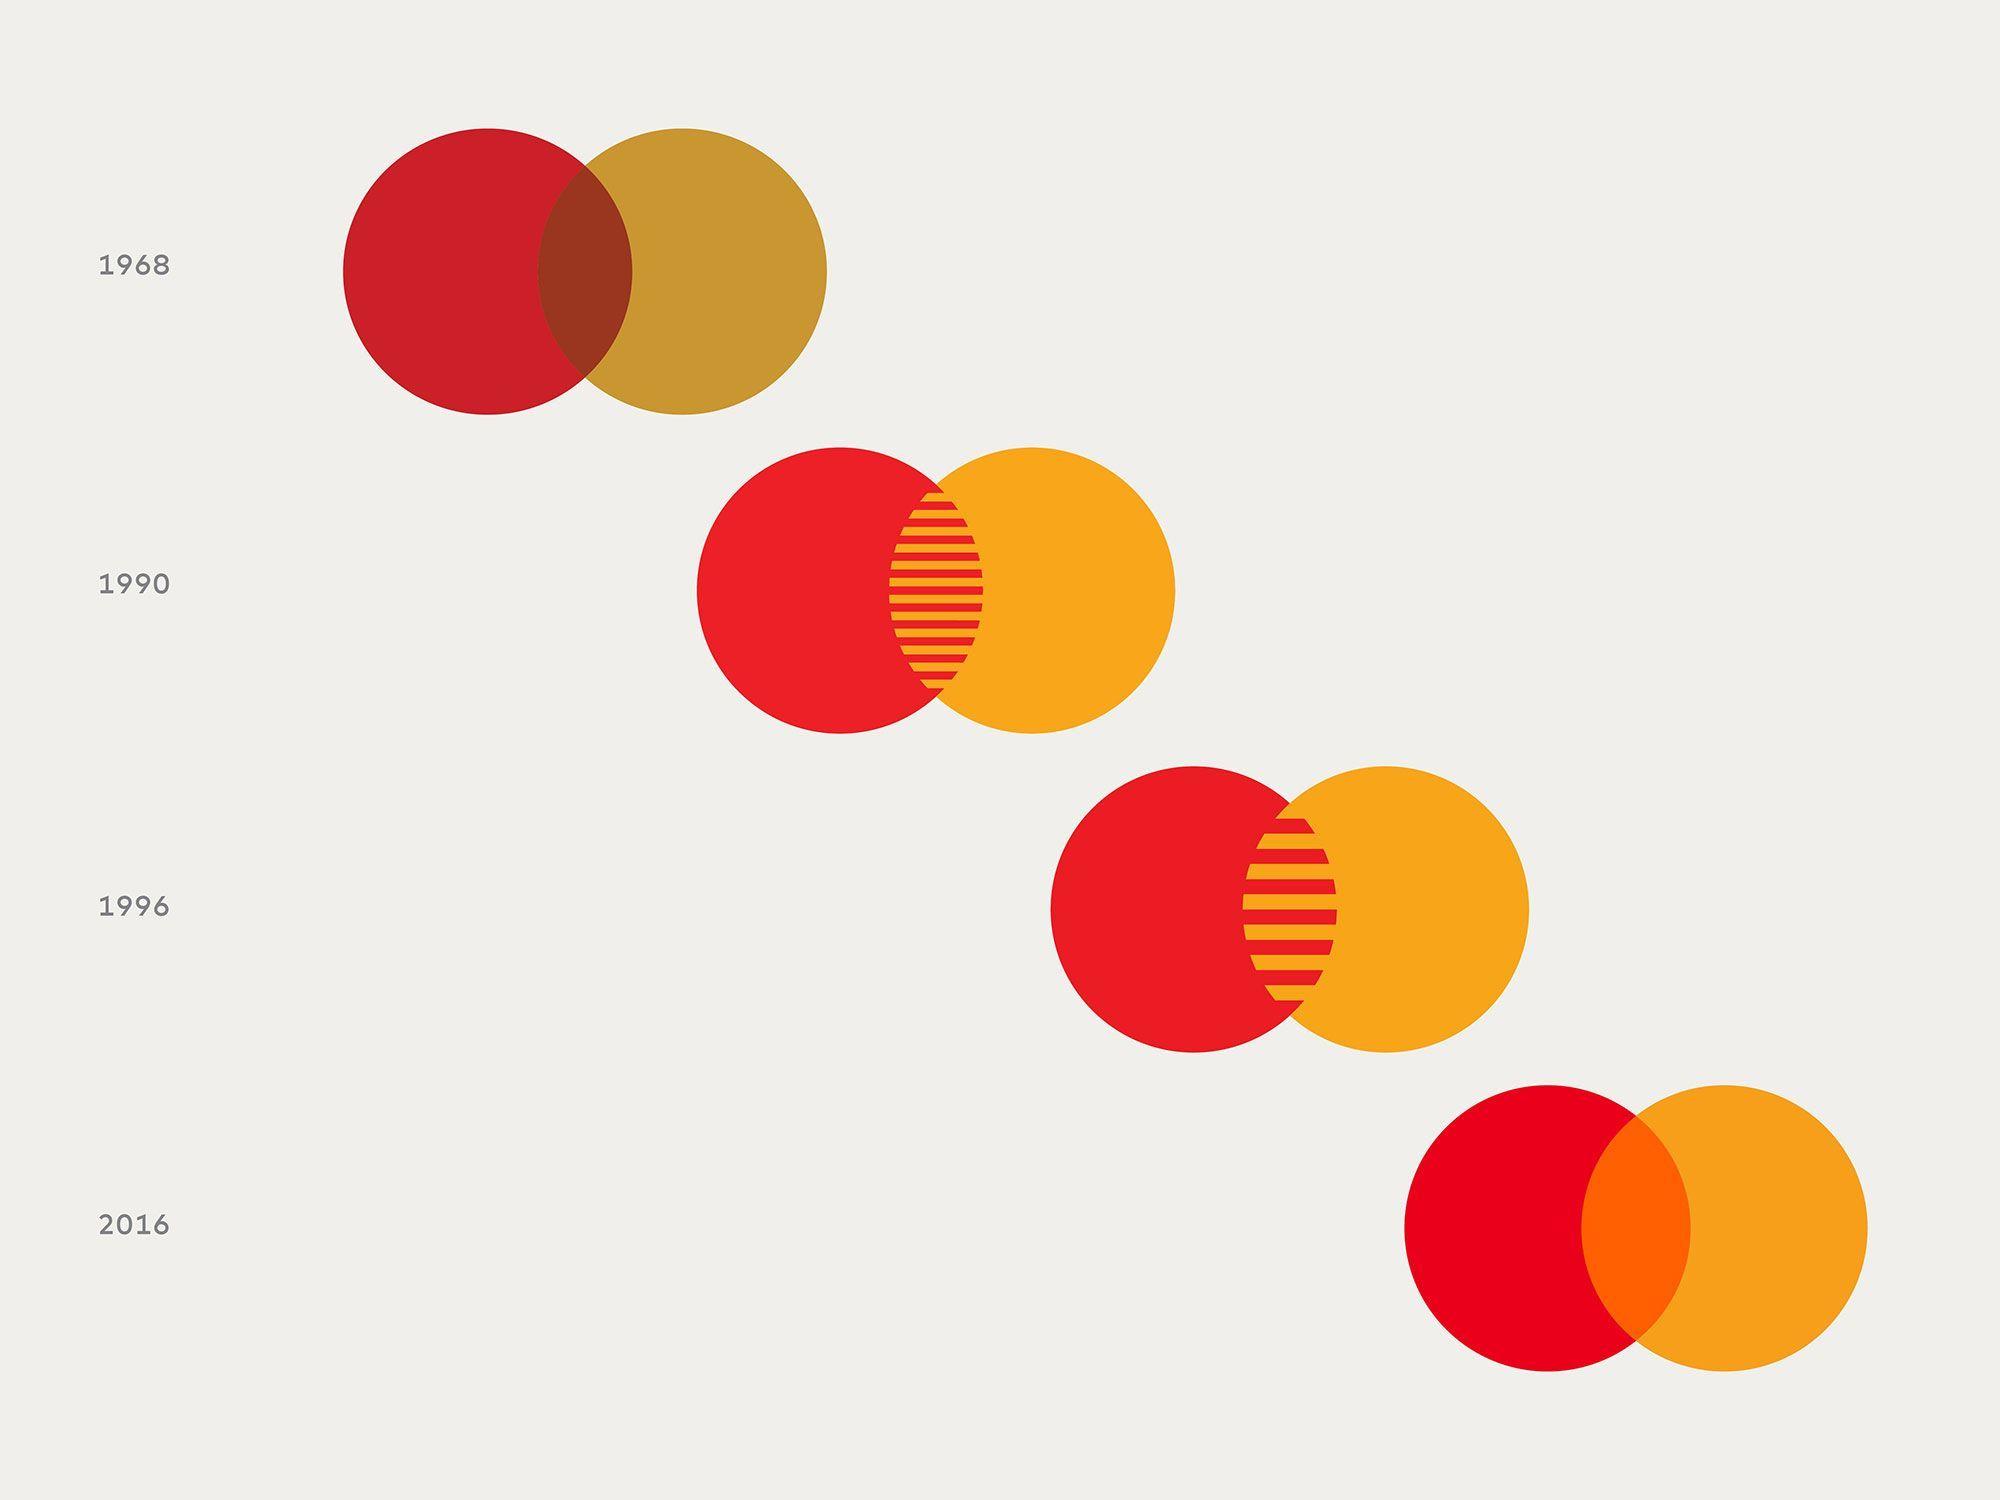 New MasterCard Logo - Pentagram's Michael Bierut Geeks Out Over the Color Theory Behind